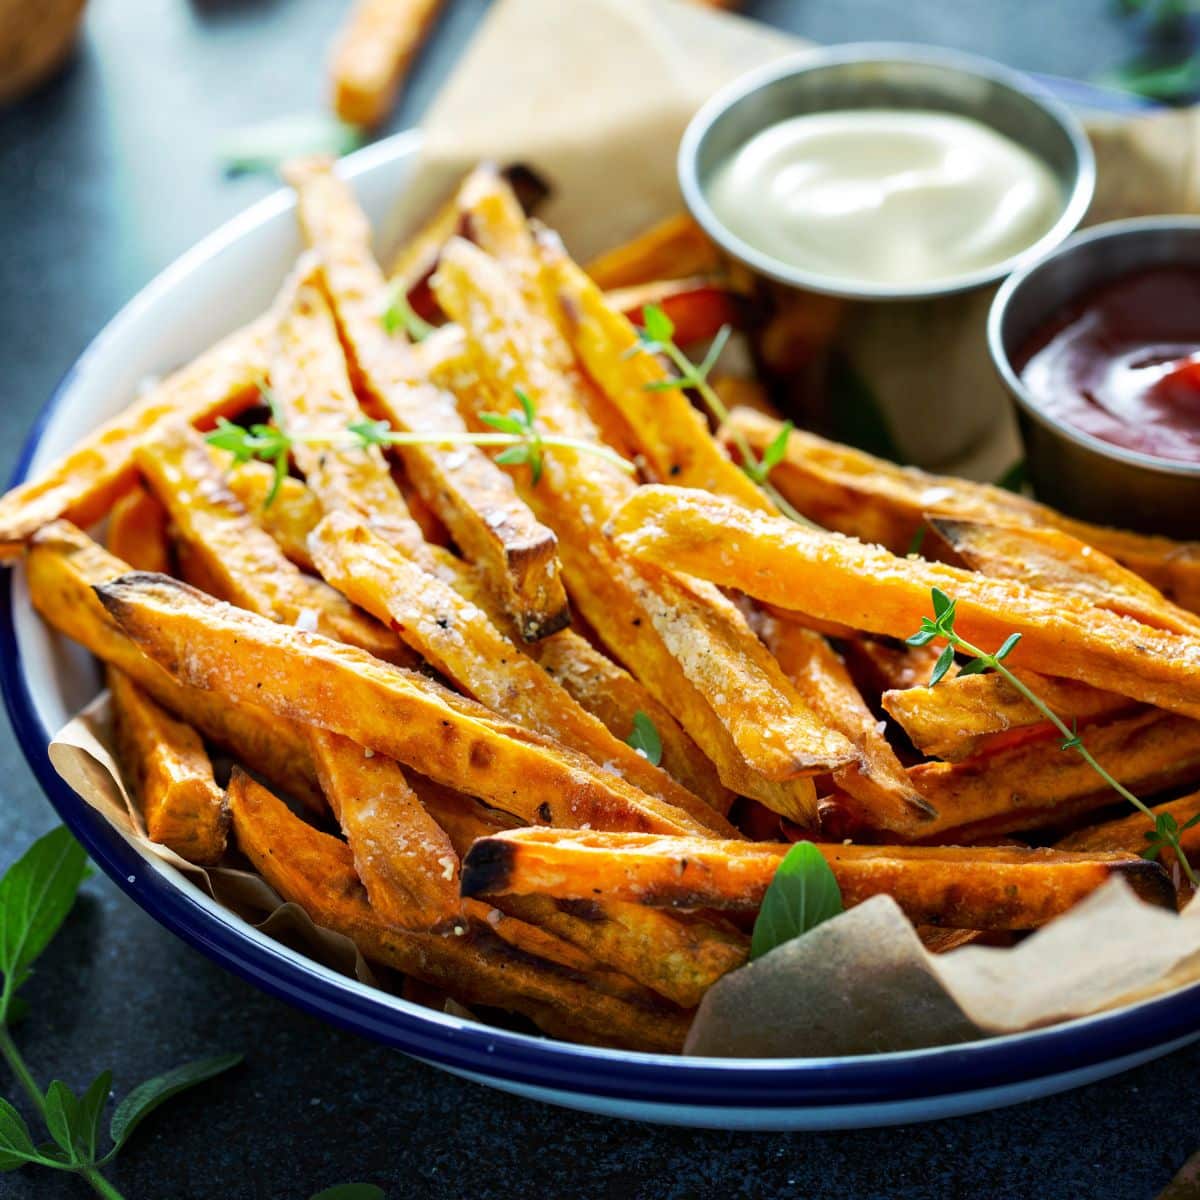 Plate with oven fries.